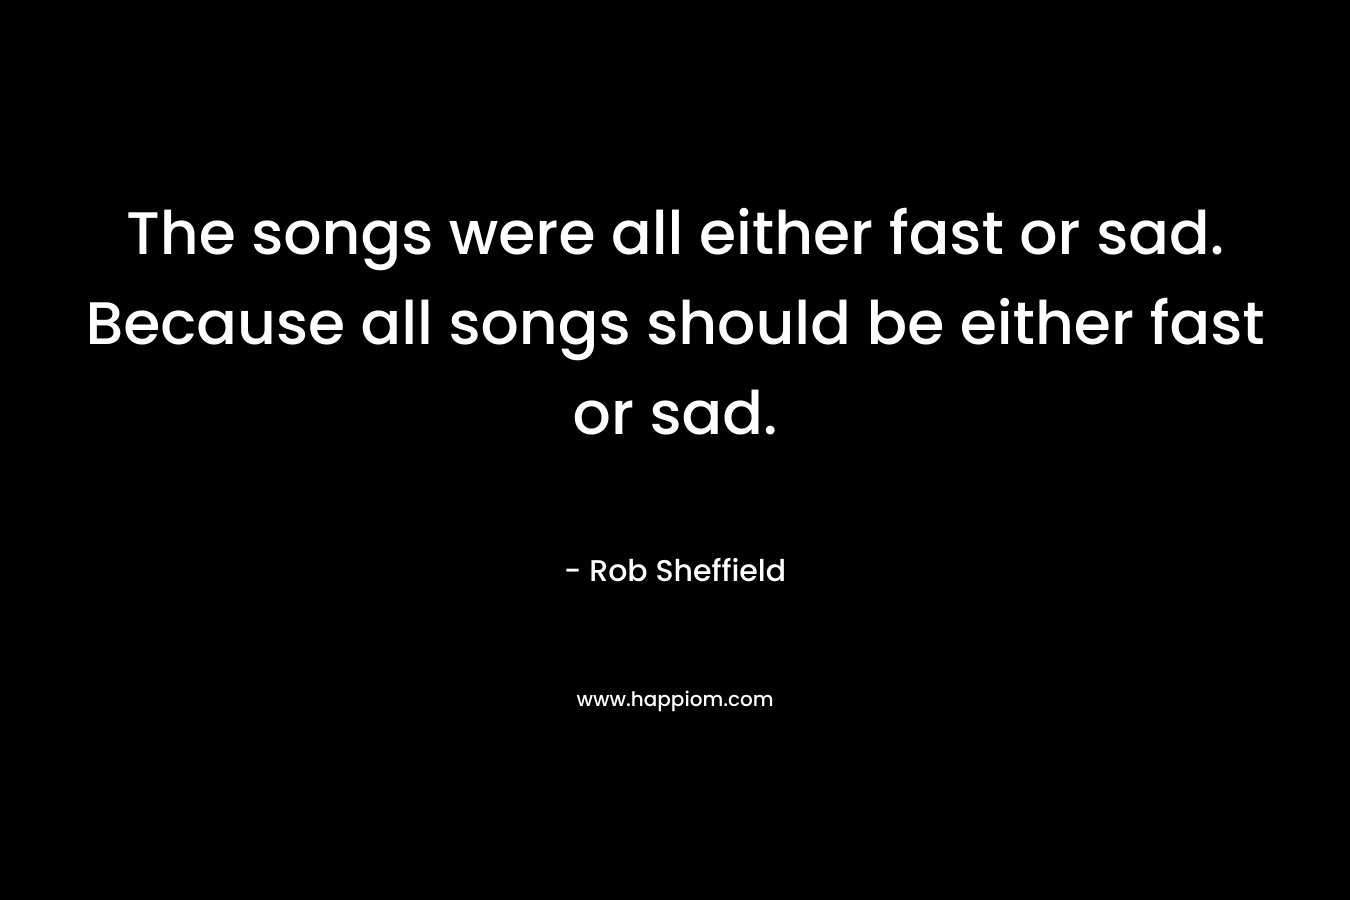 The songs were all either fast or sad. Because all songs should be either fast or sad.